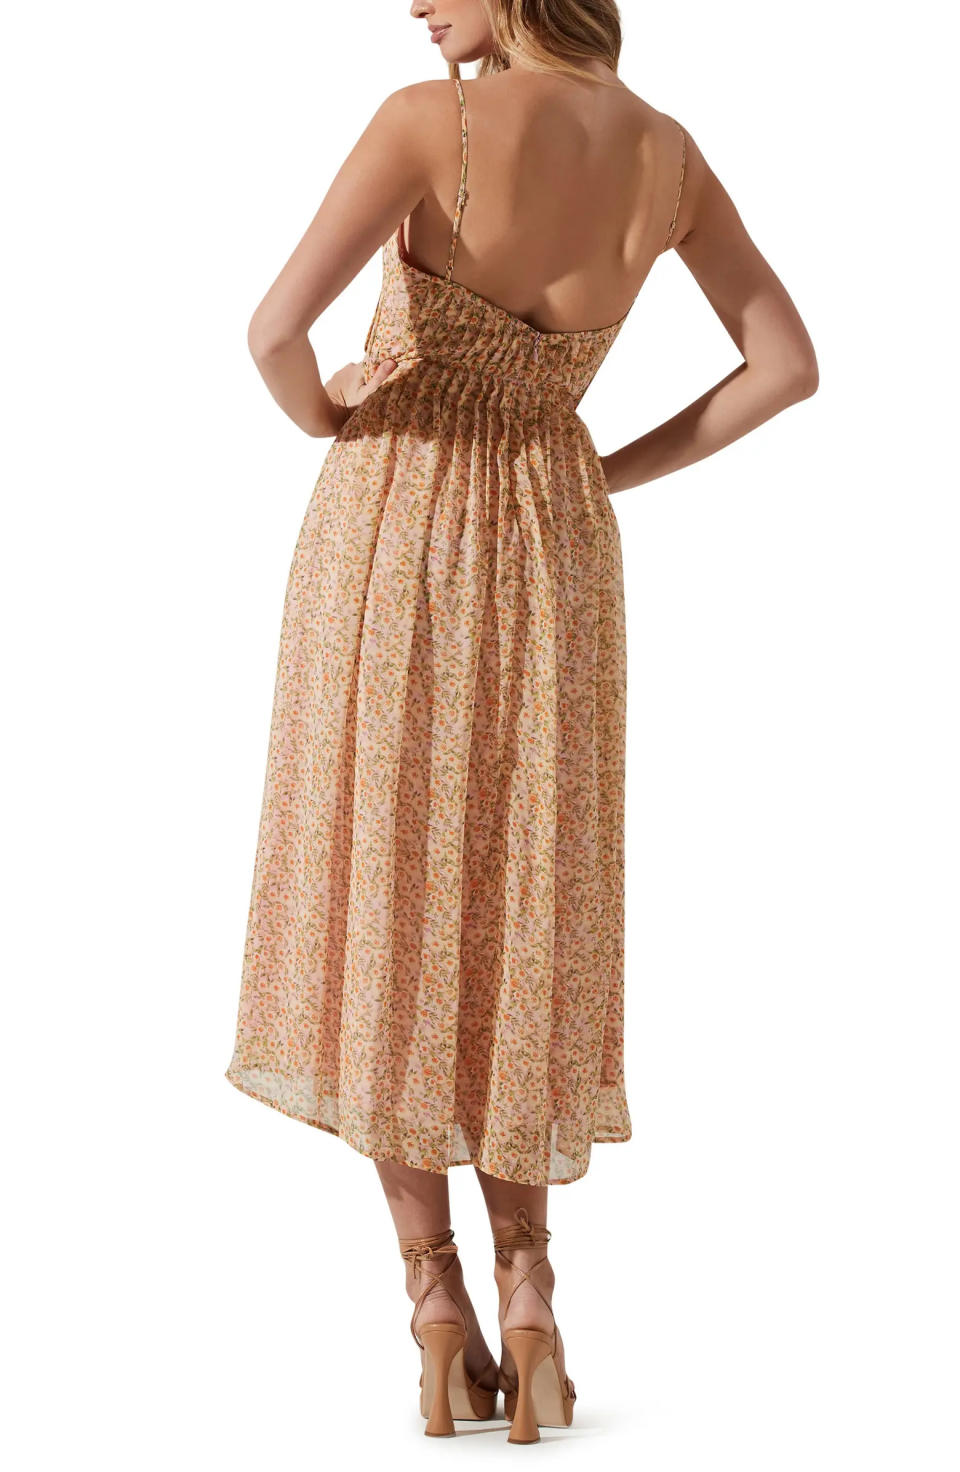  This dress's sheer, airy fabric is layered over a lined skirt, so you don't have to stress about it being see-through.